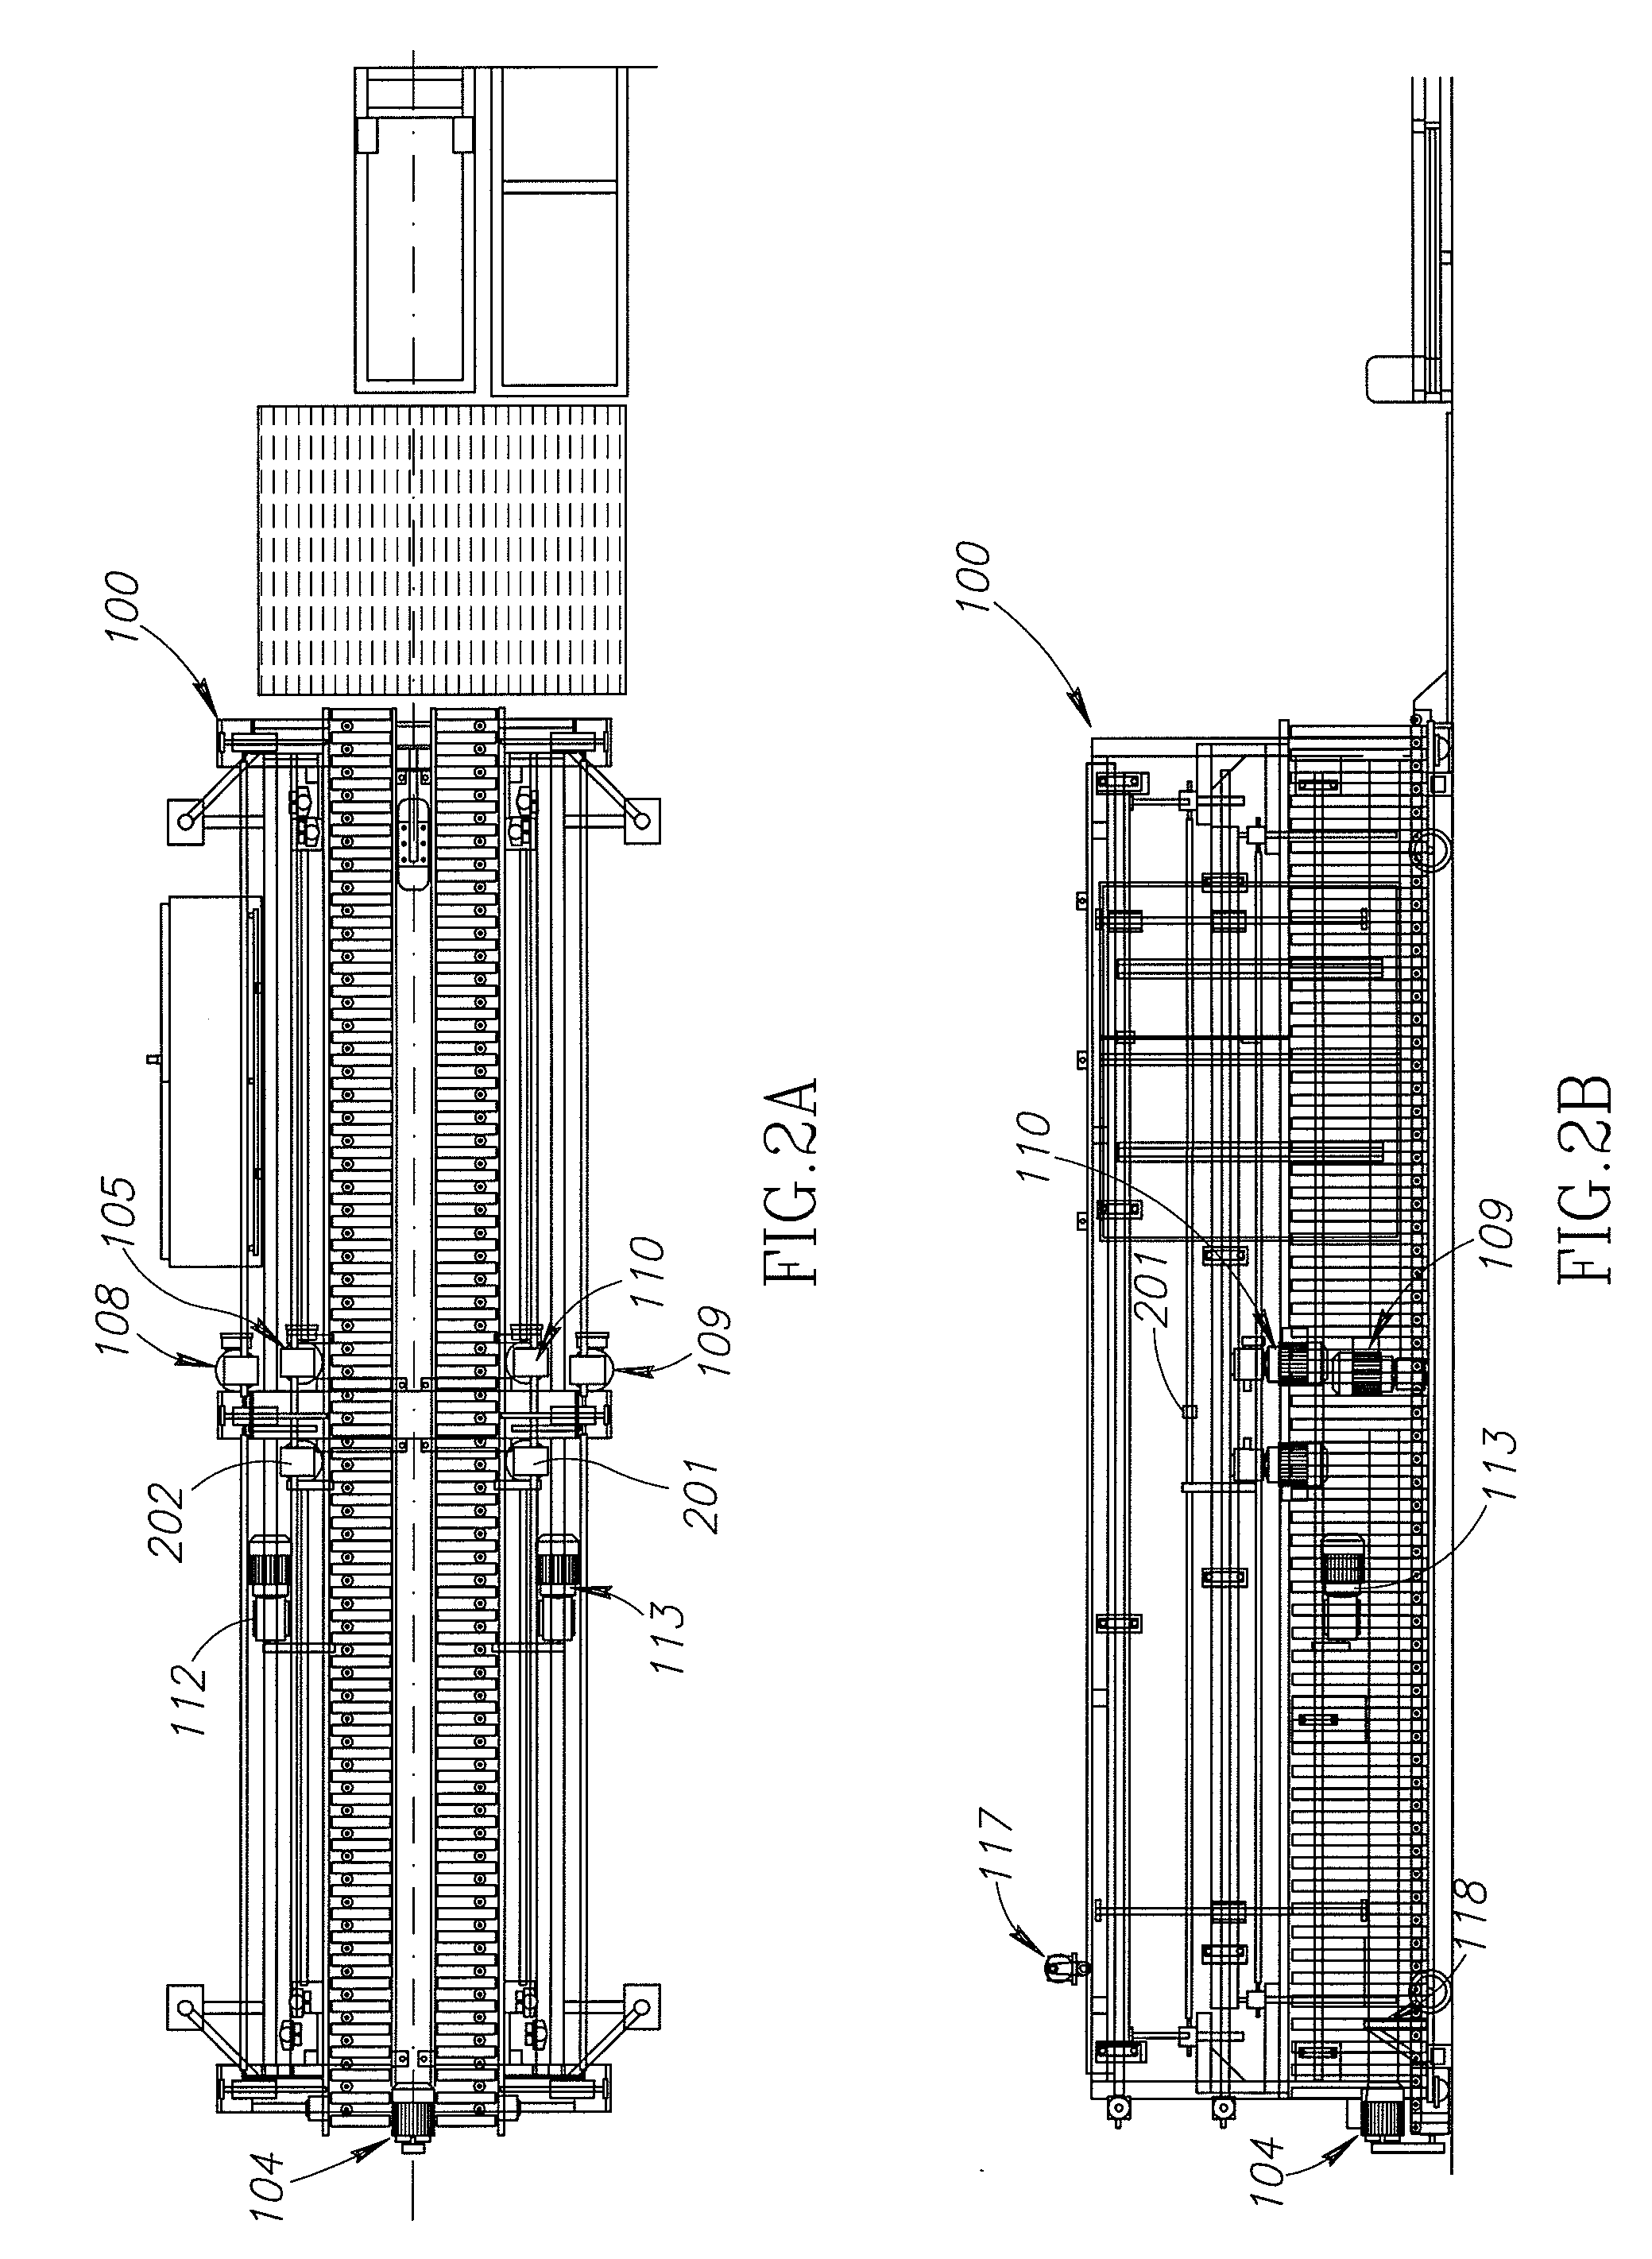 Apparatus and method for packaging siding panels